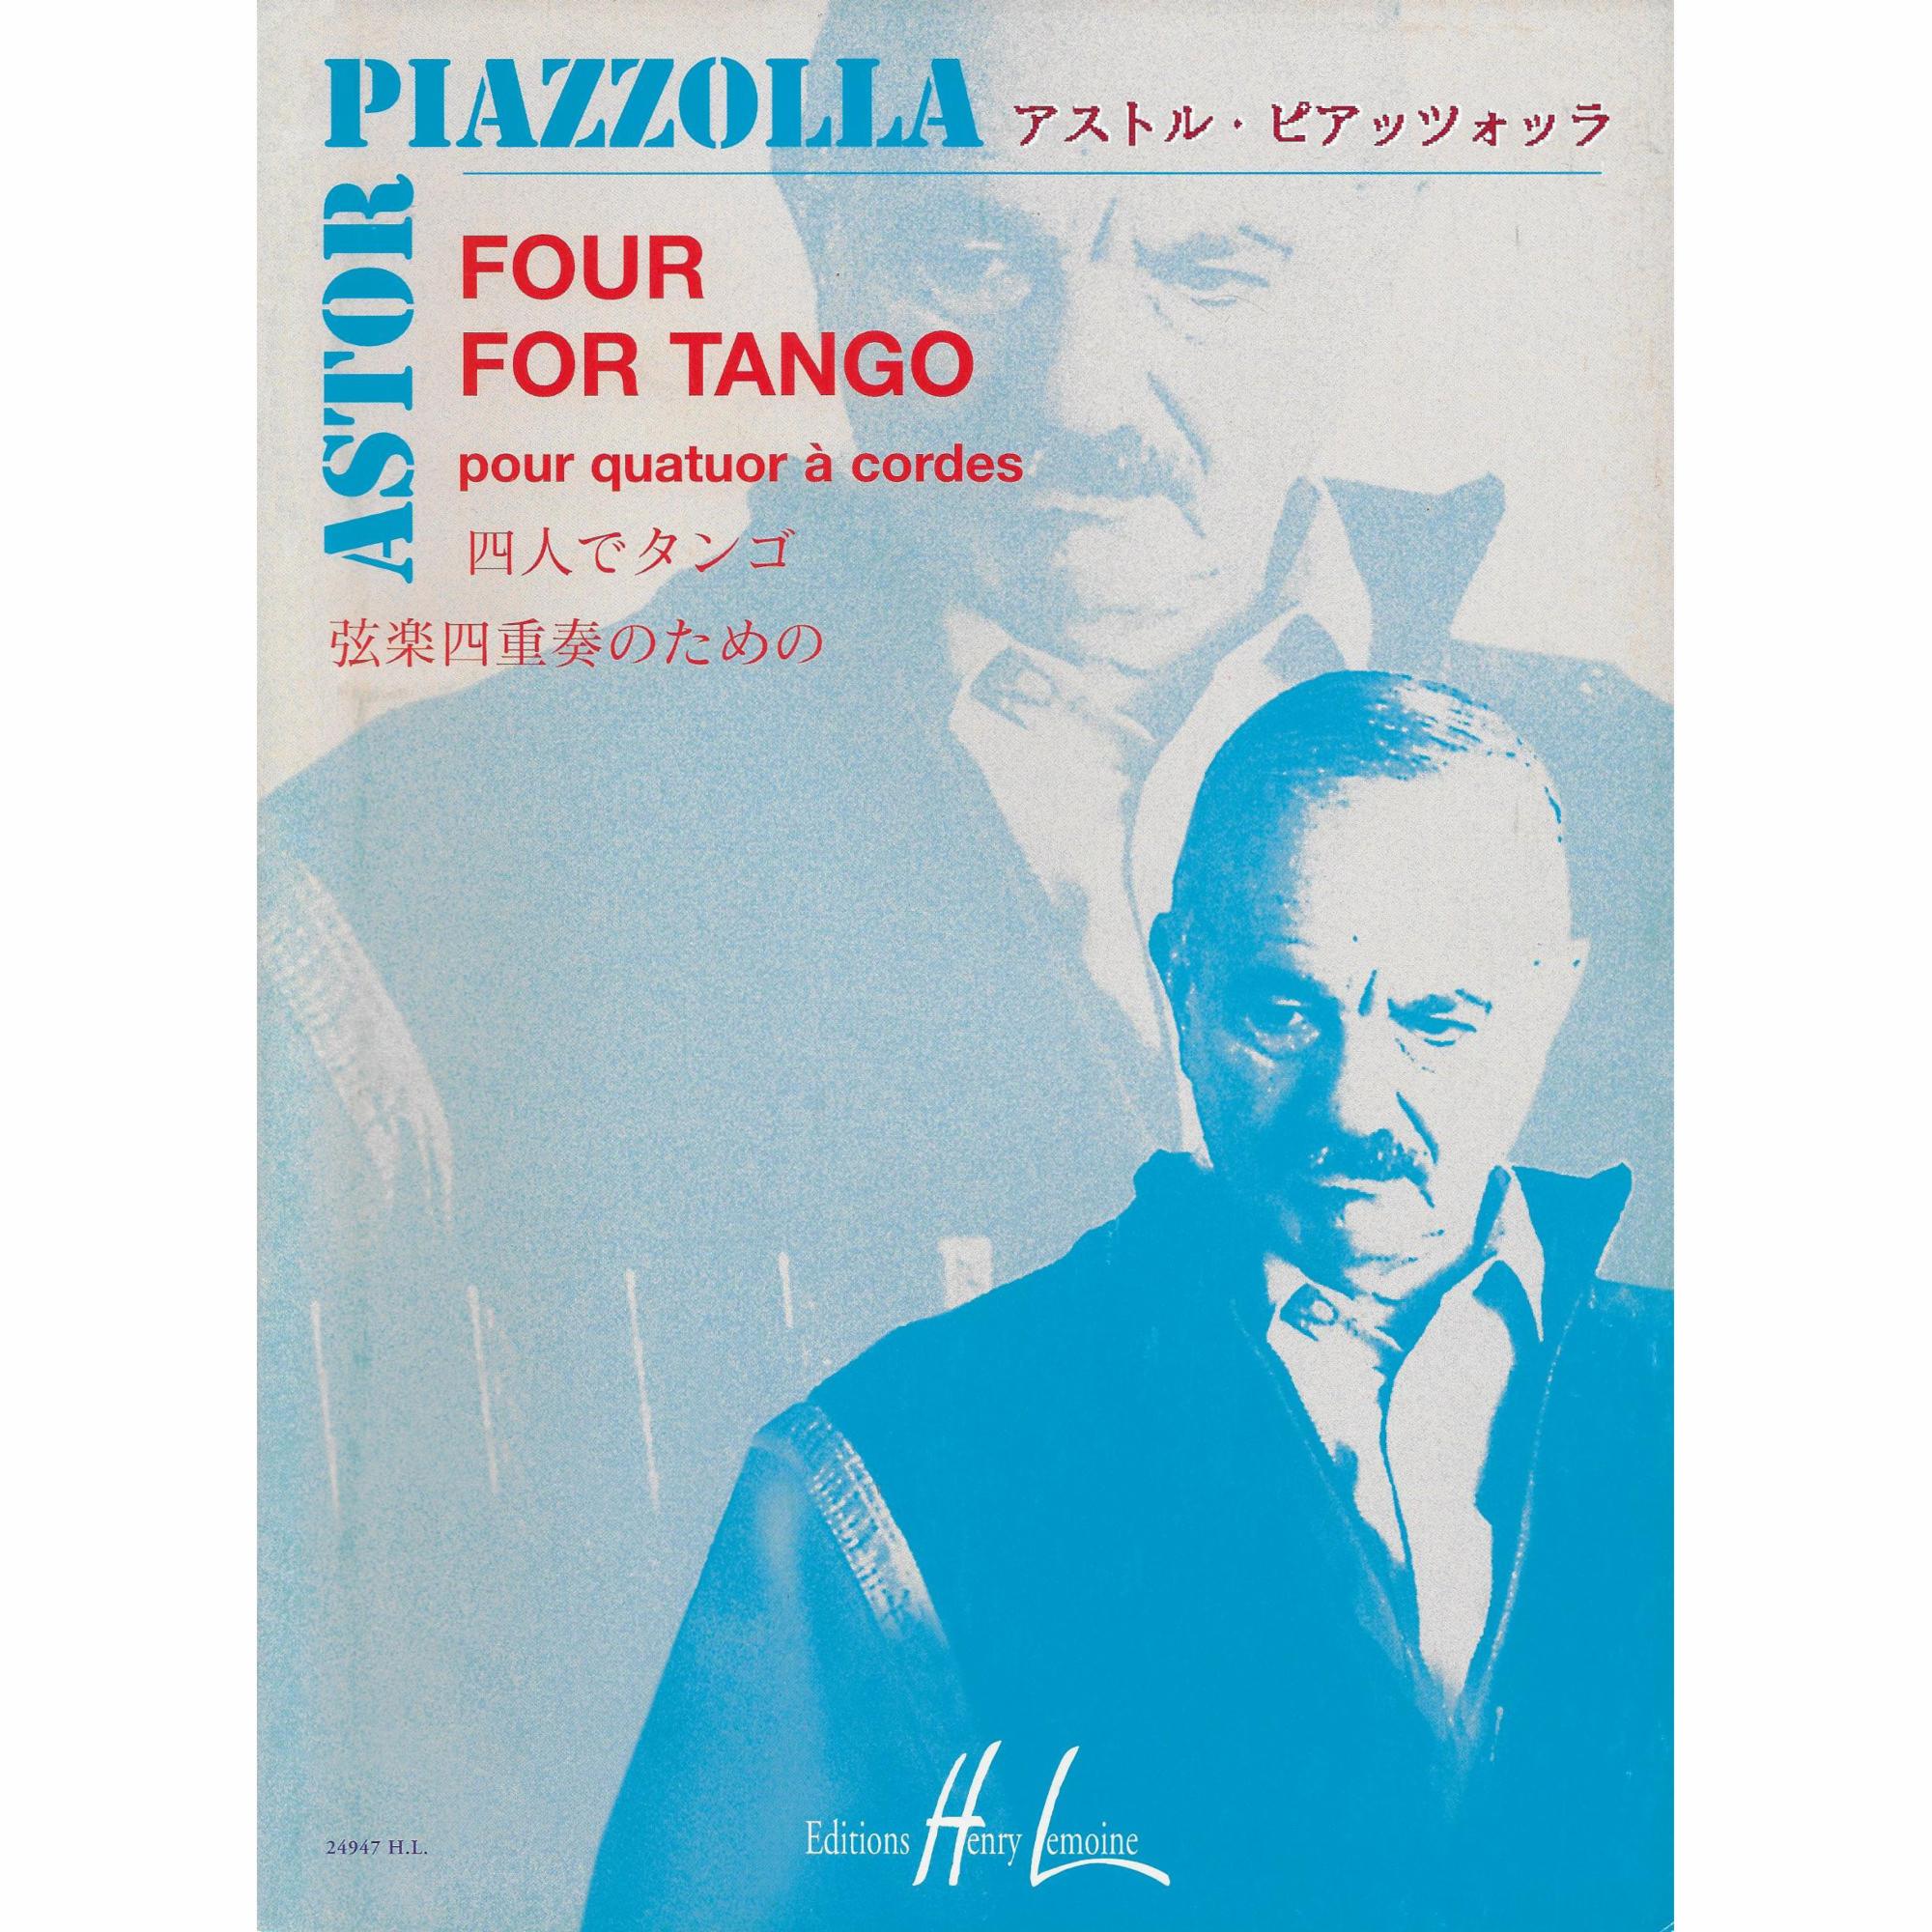 Piazzolla -- Four, for Tango for String Quartet